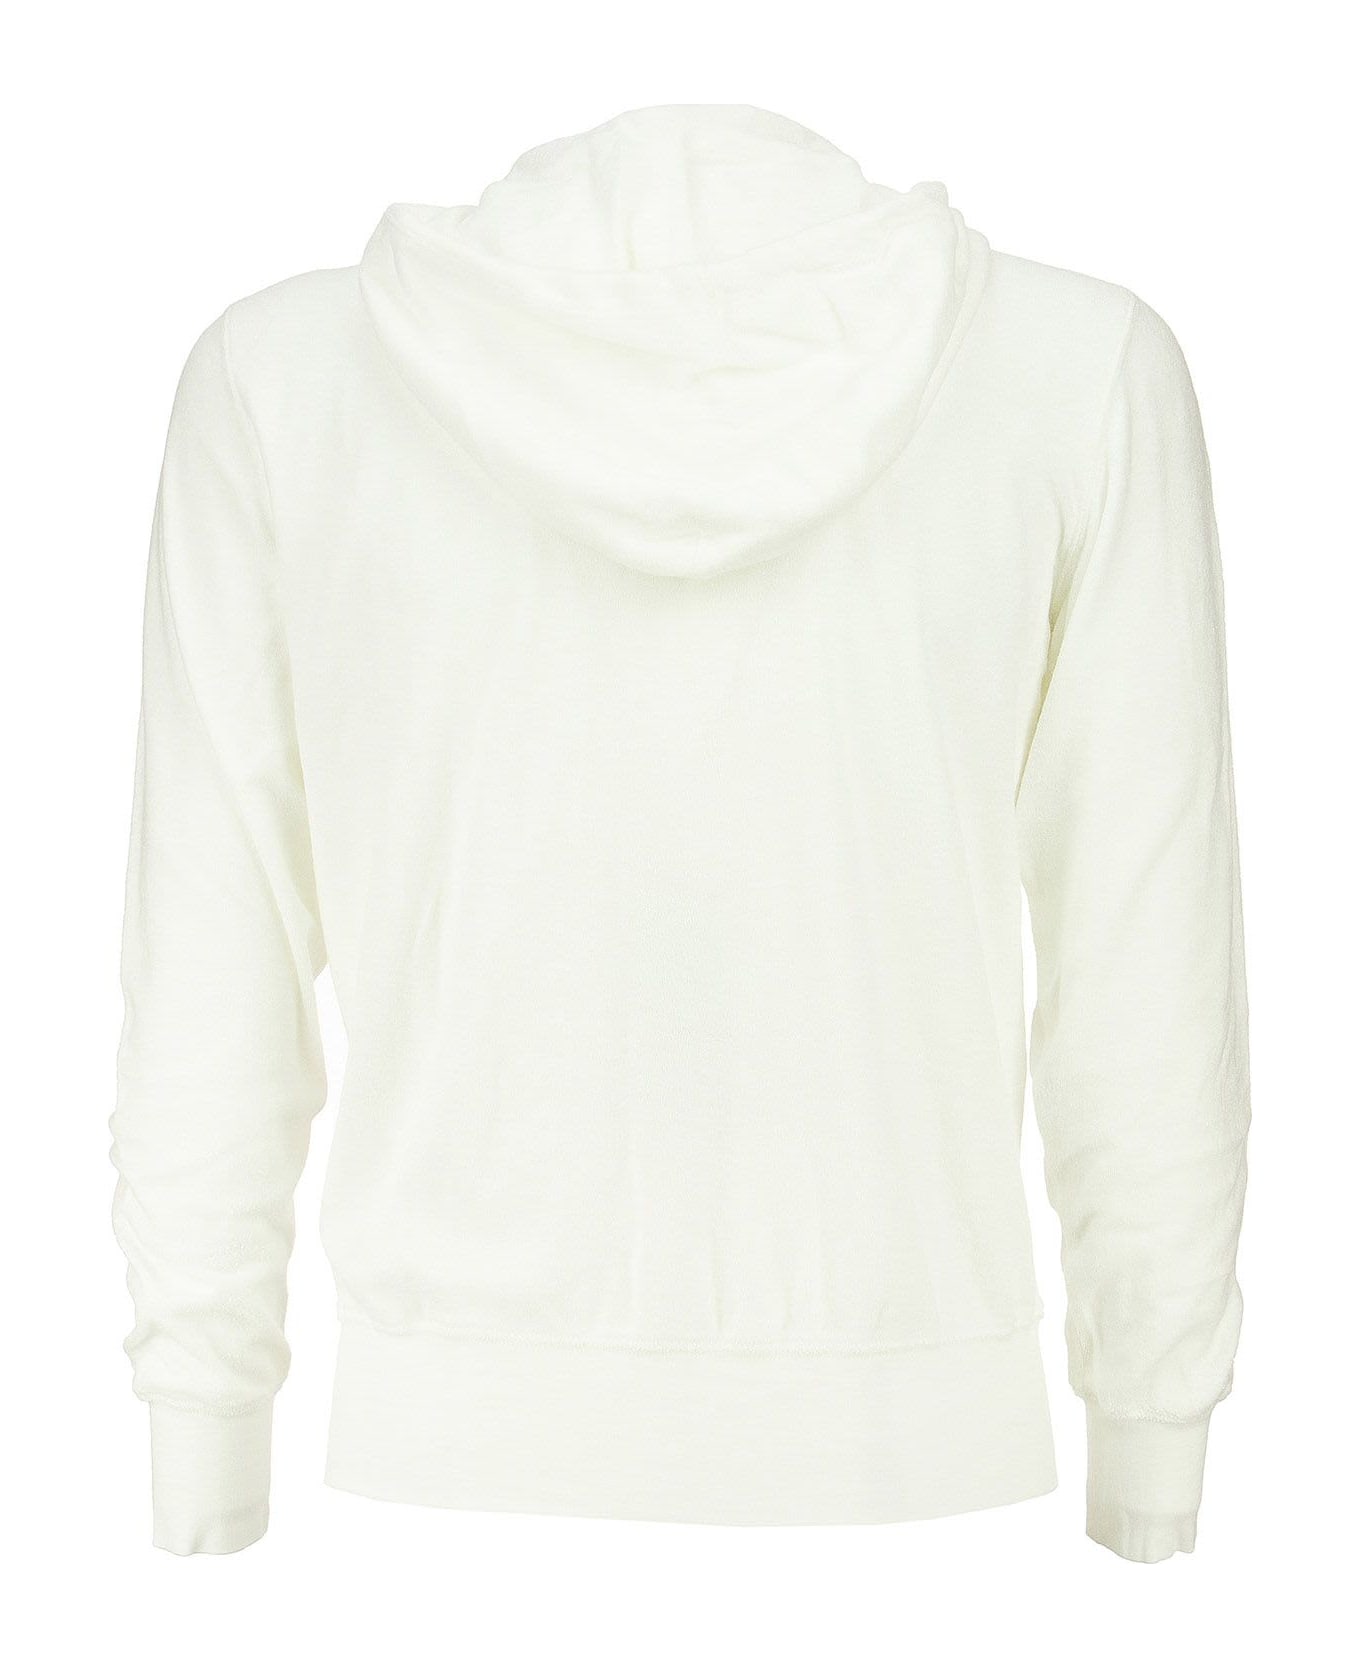 Majestic Filatures Hooded Sweatshirt In Cotton And Modal - White ニットウェア